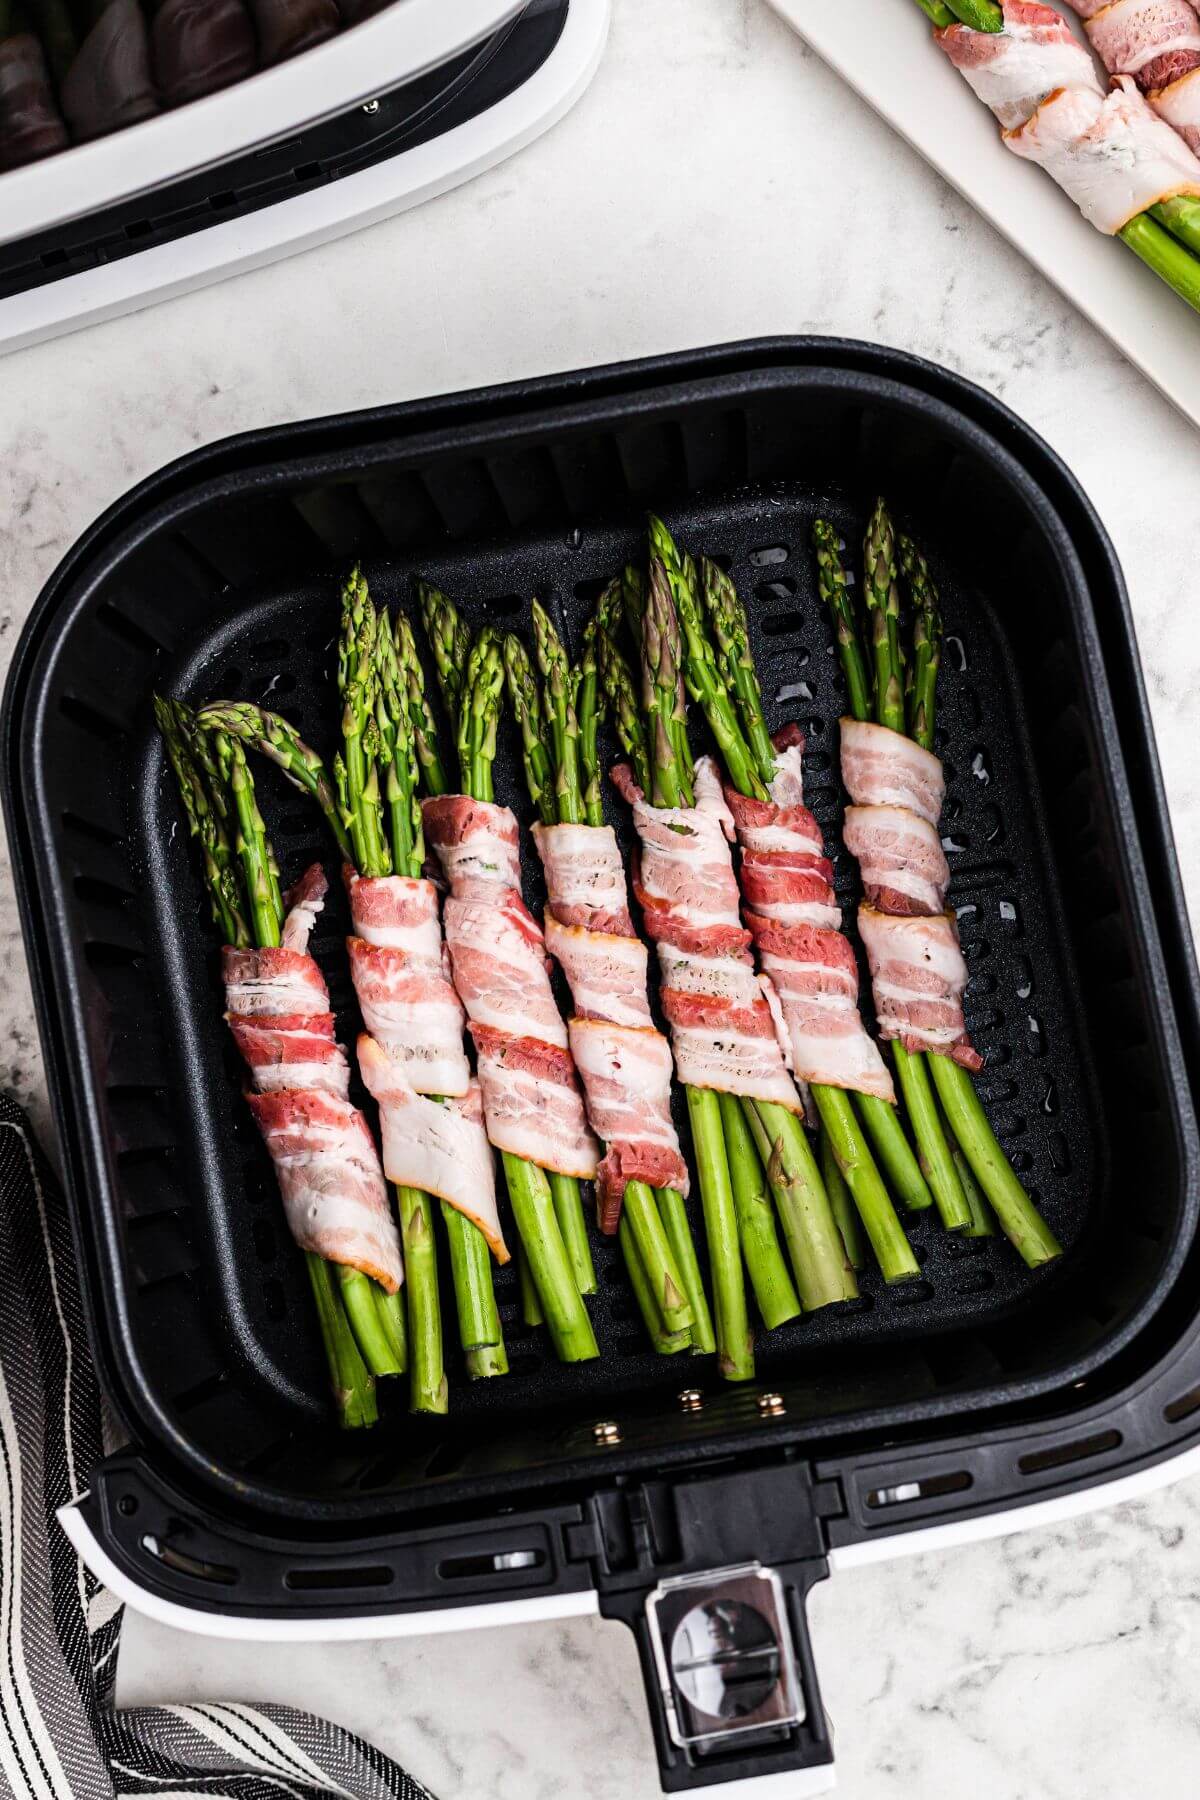 Uncooked bacon slices wrapped around asparagus spears in the air fryer basket. 